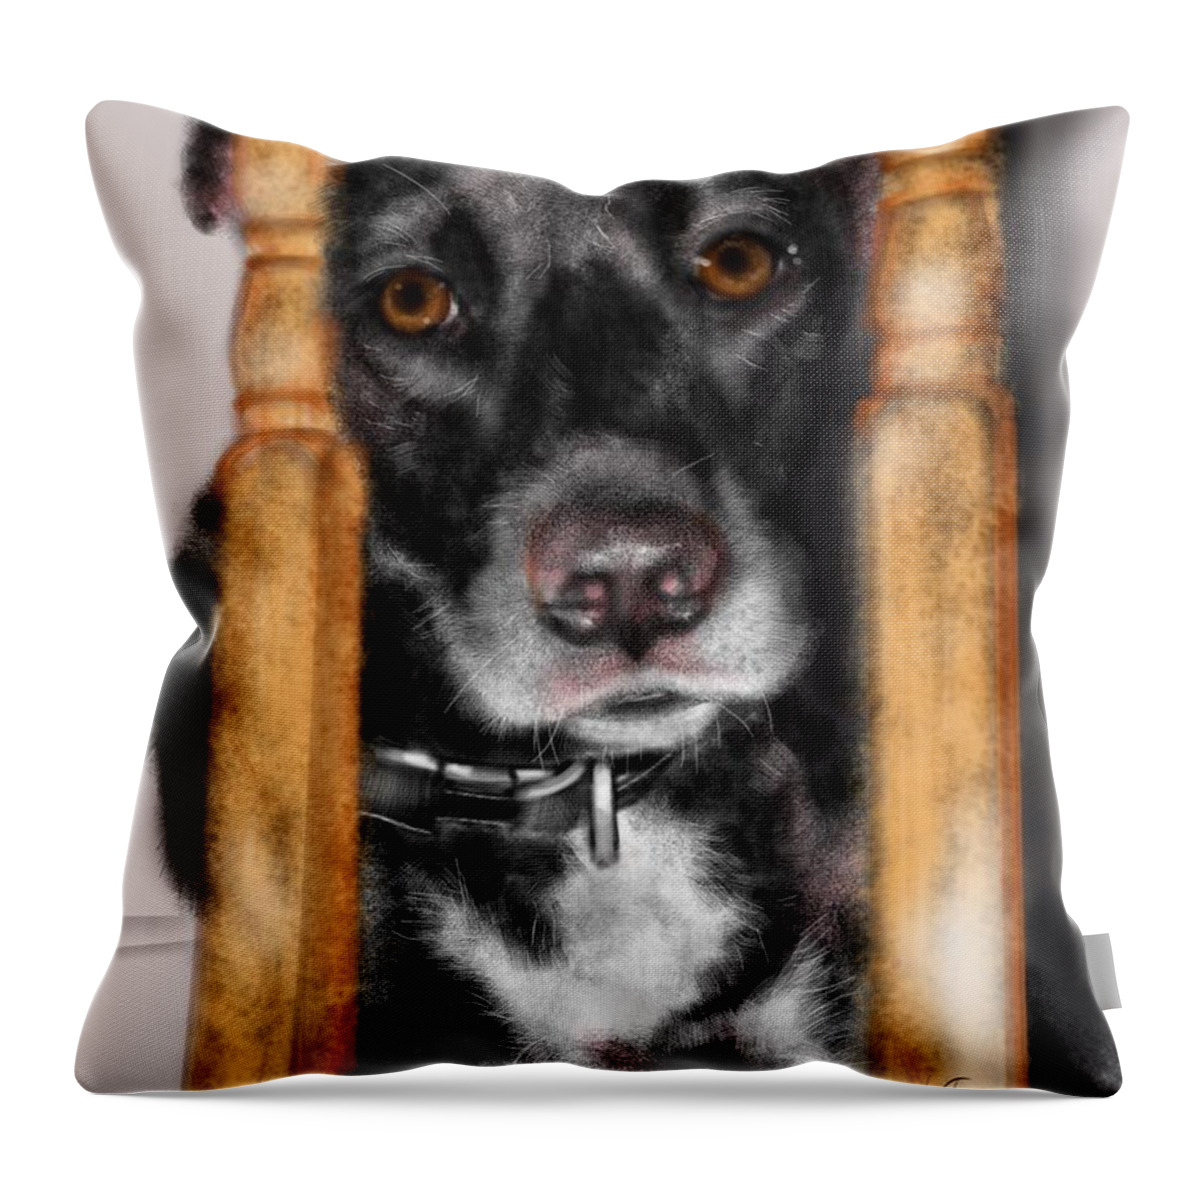 Dog Throw Pillow featuring the painting I Am Lonely by Lois Ivancin Tavaf